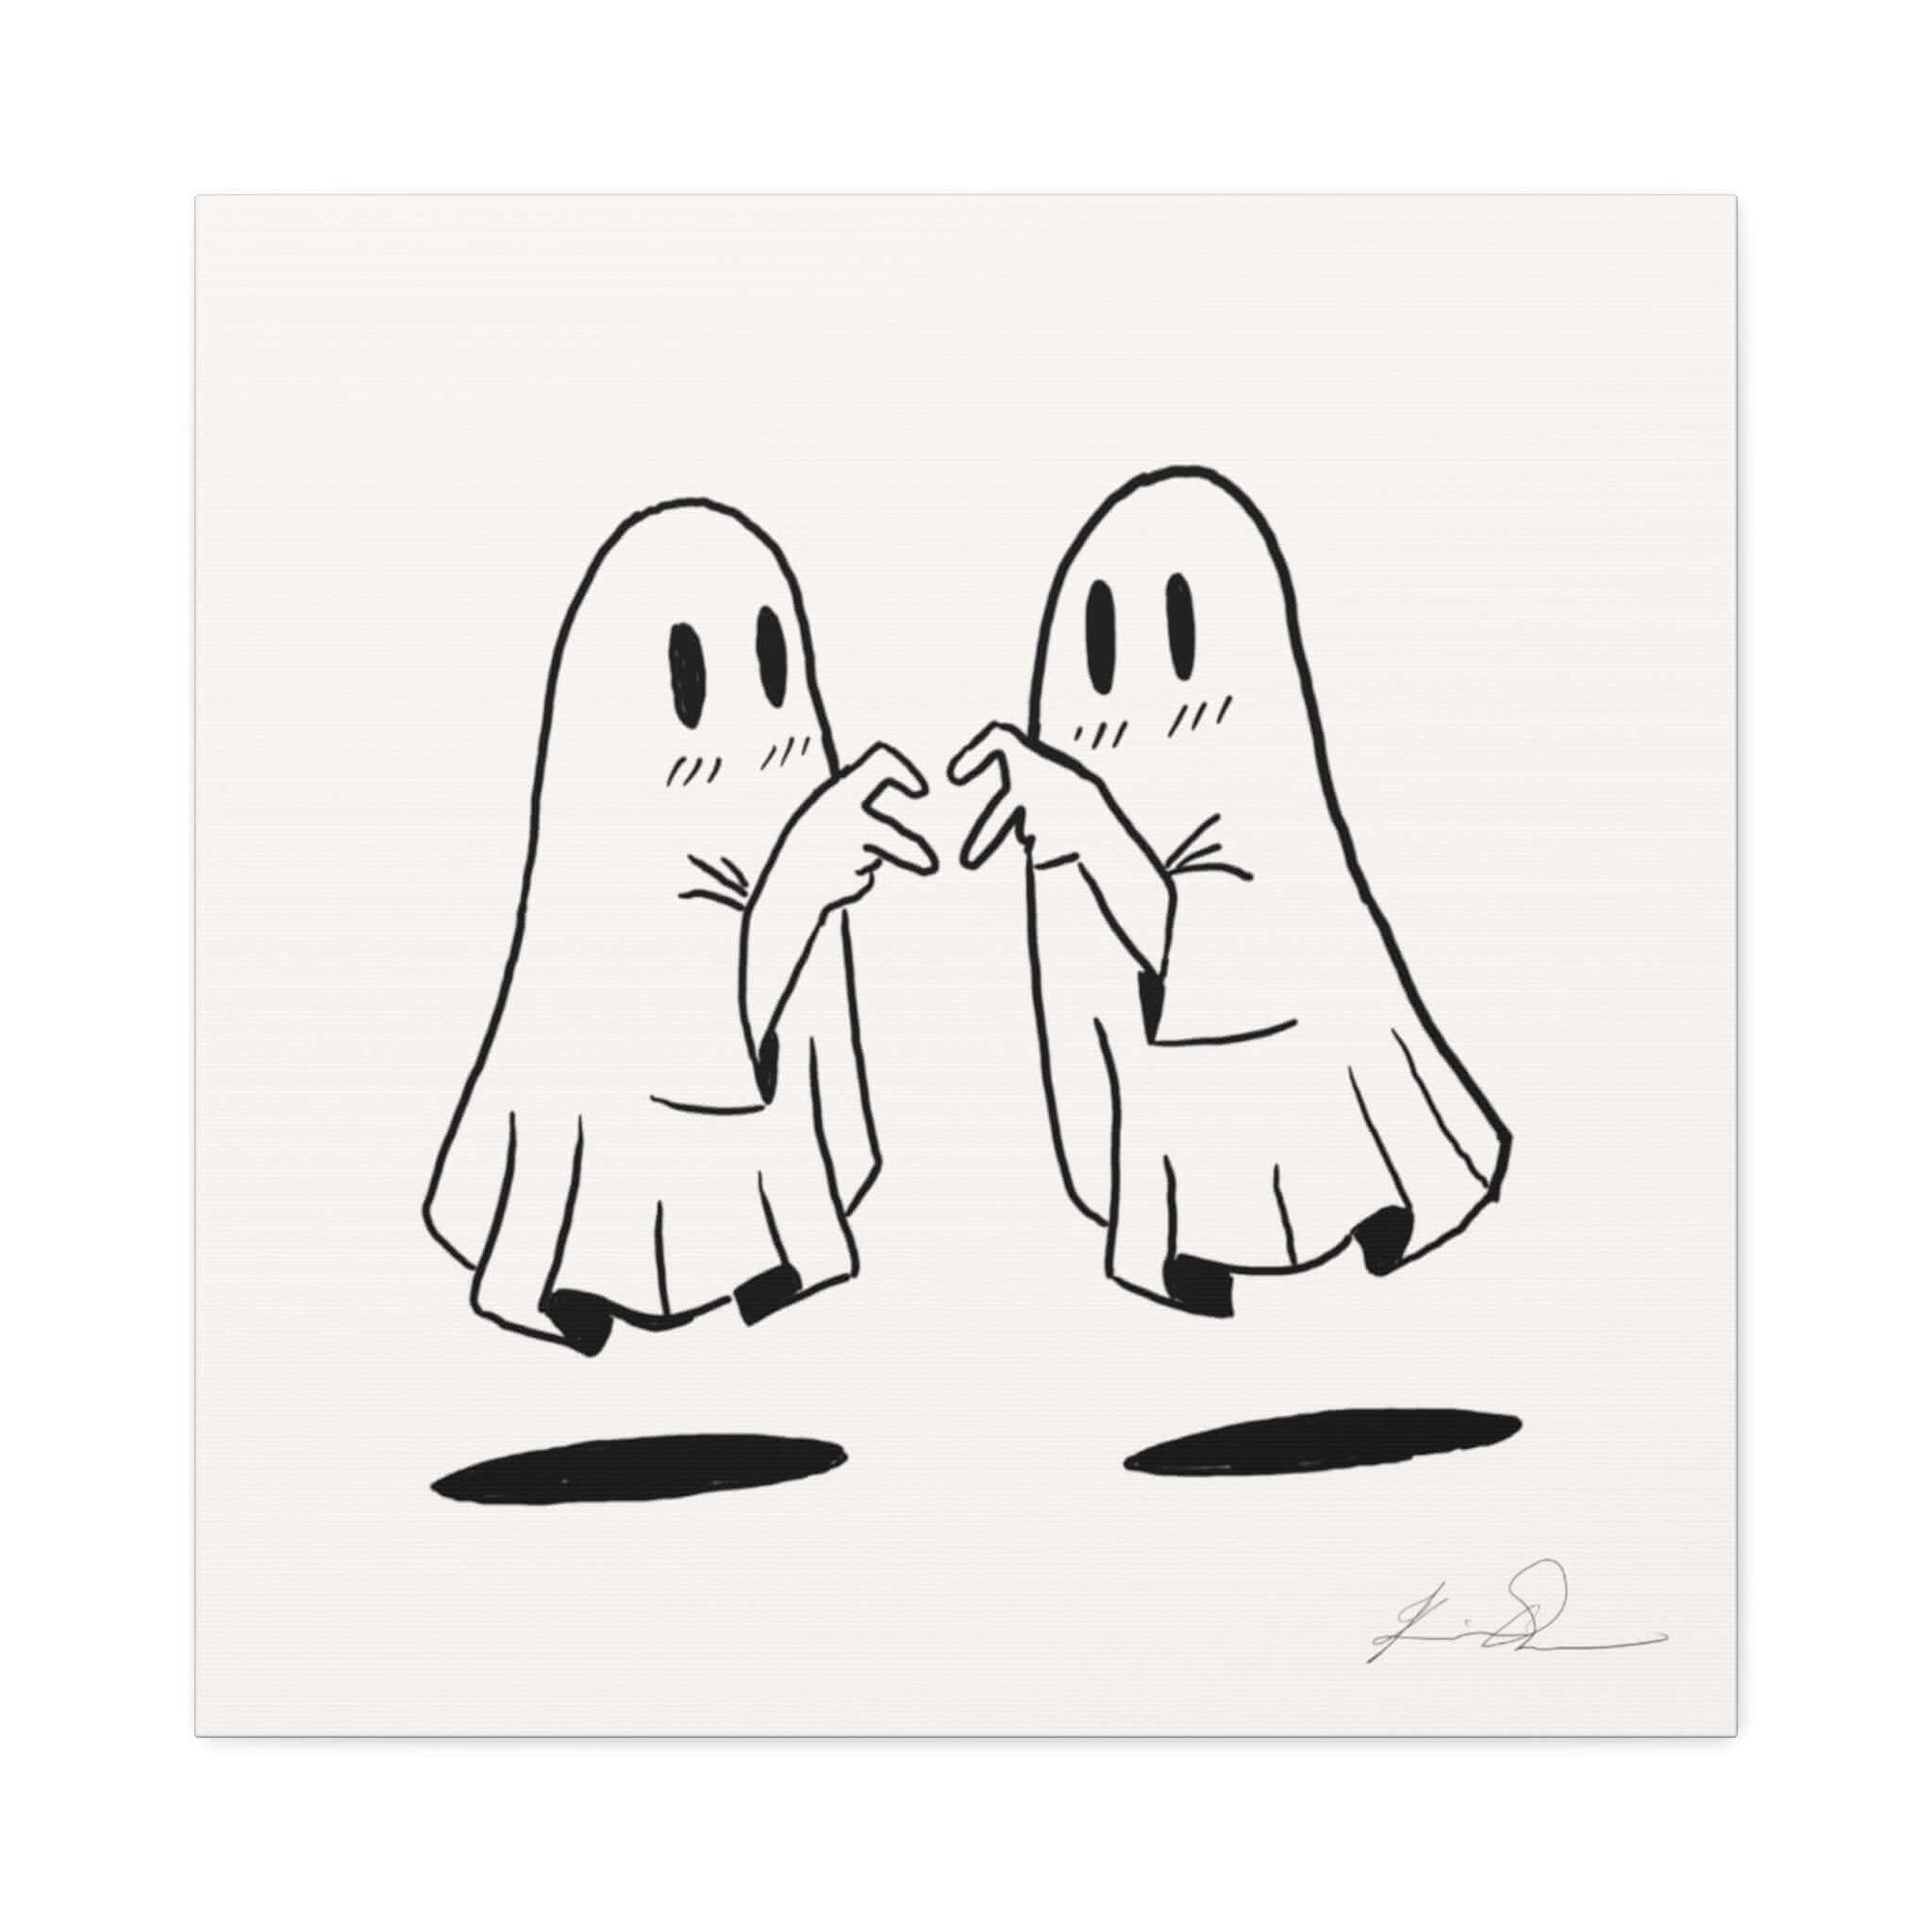 Cute cartoon ghosts playing Rock, Paper, Scissors floating above shadows